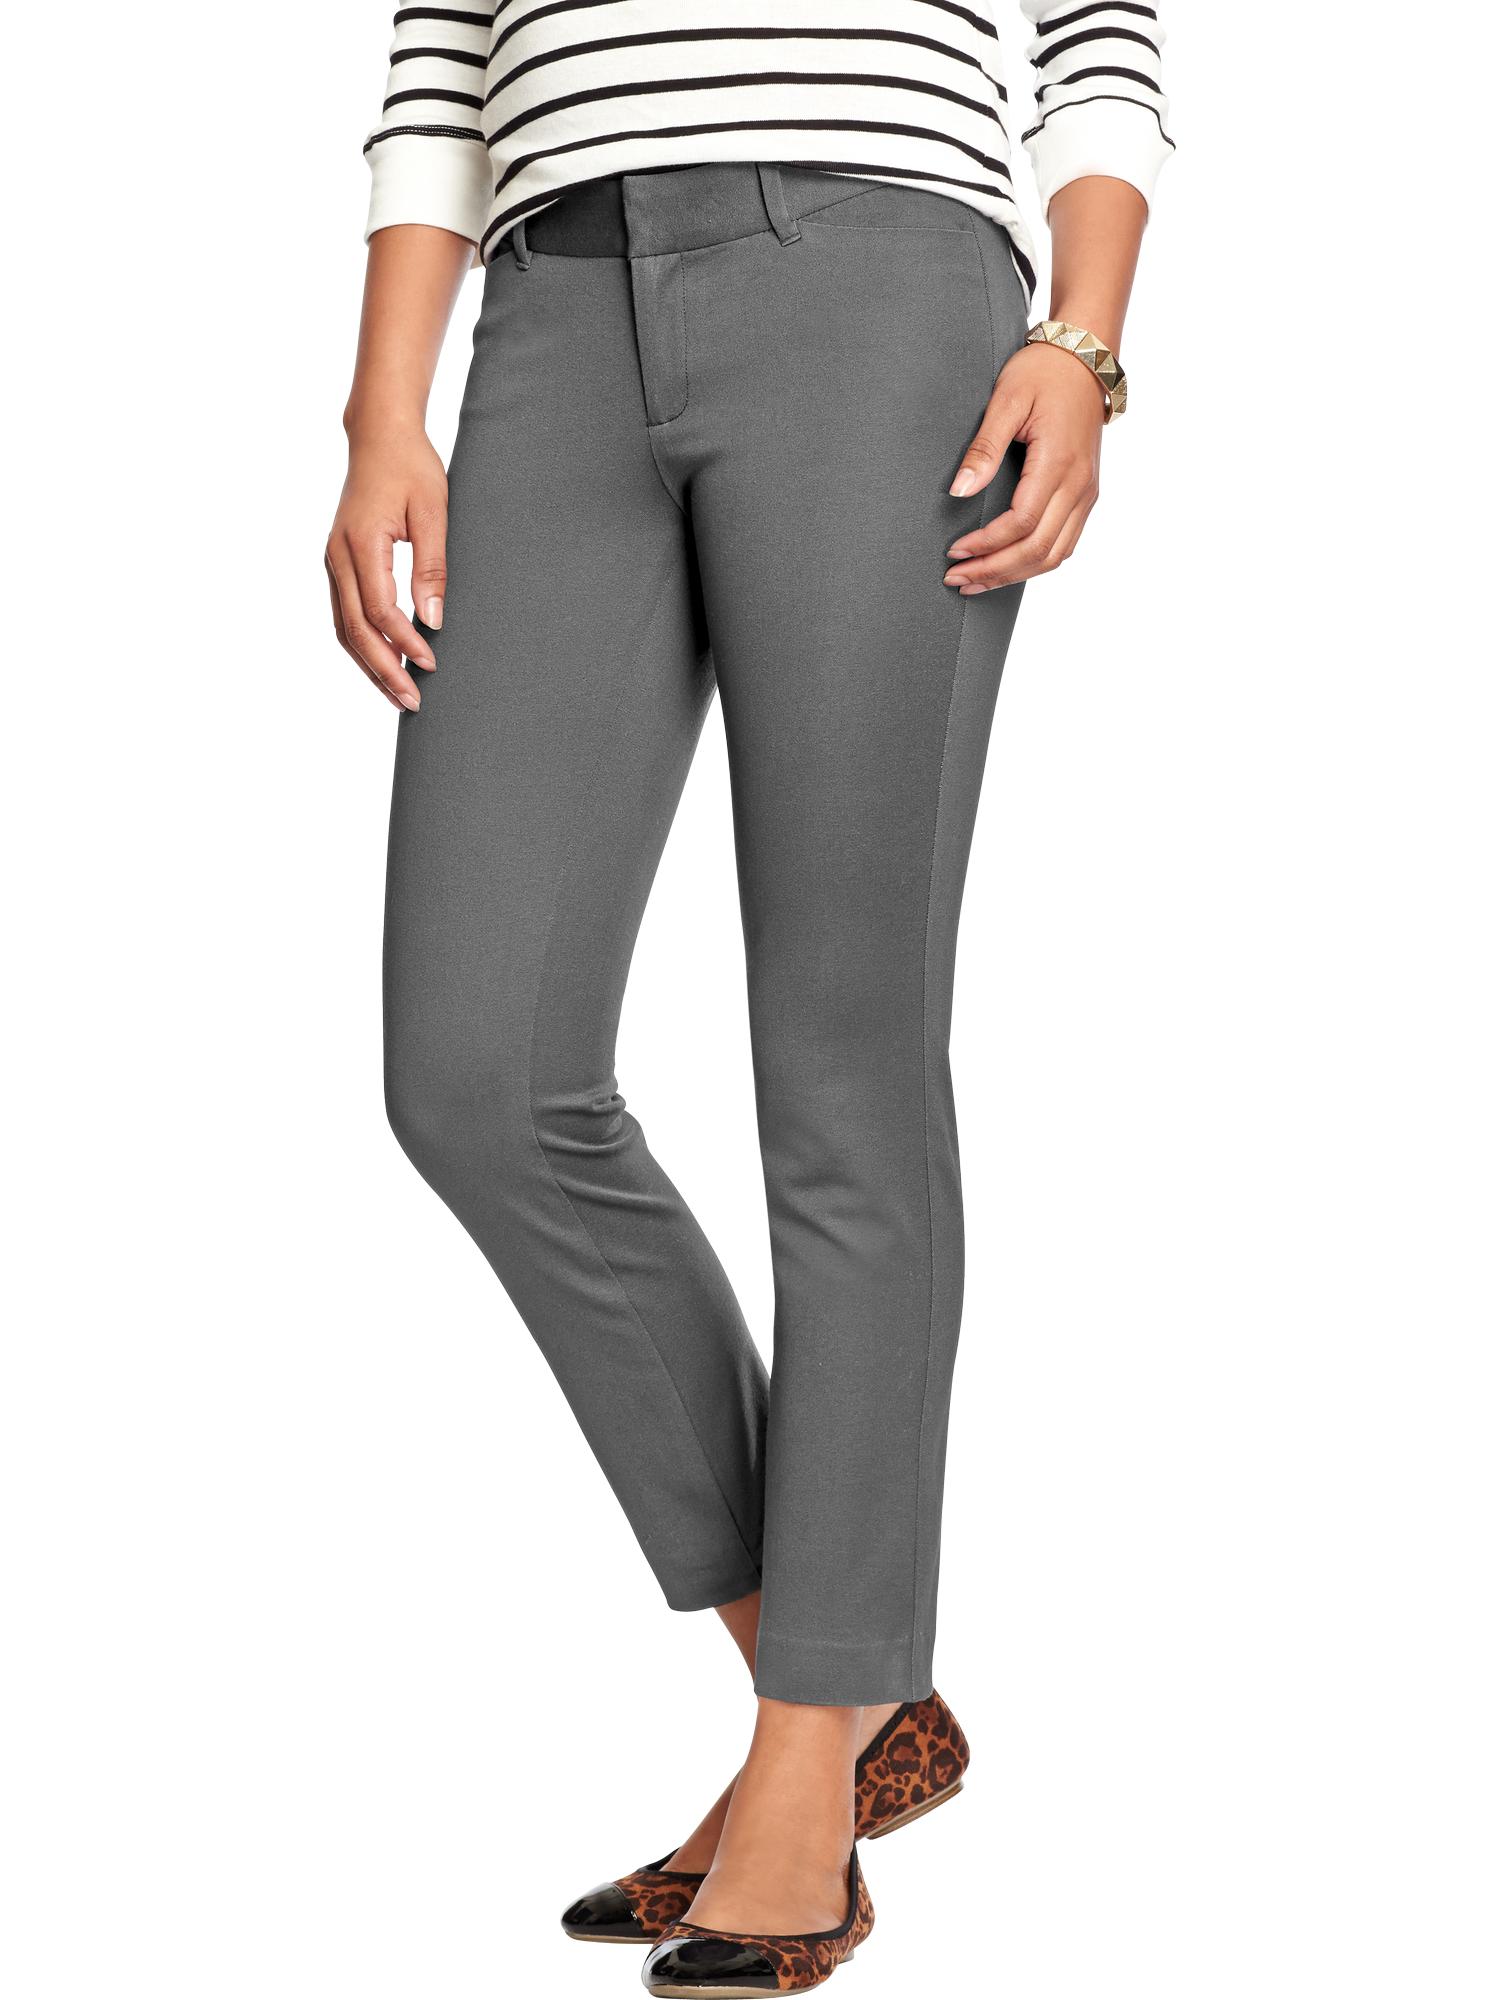 The Pixie Mid-Rise Ankle Pants